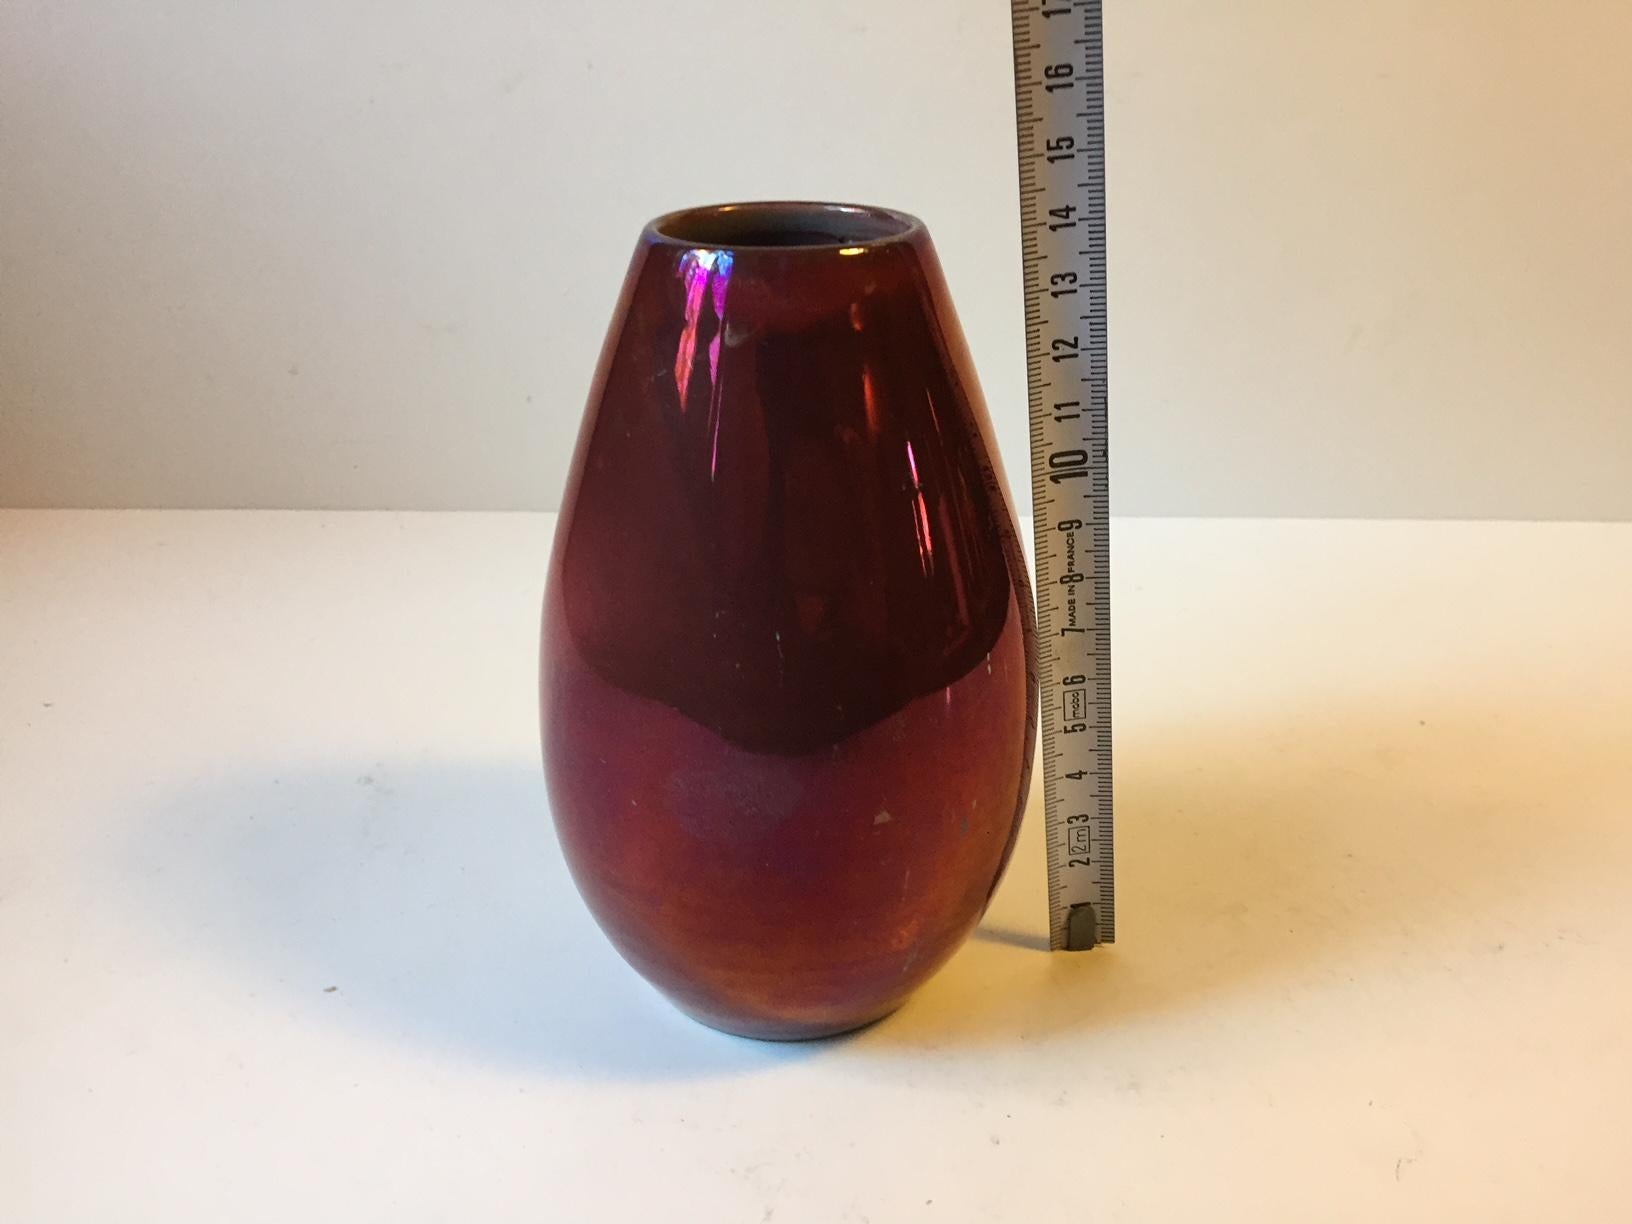 Unique vase in deep red lustre glaze. Its by a Danish ceramist called Øbo who for a period of time worked at Michael Andersen & Son on the Island of Bornholm during the 1930s. This piece was created in their studio. The glazing technique is